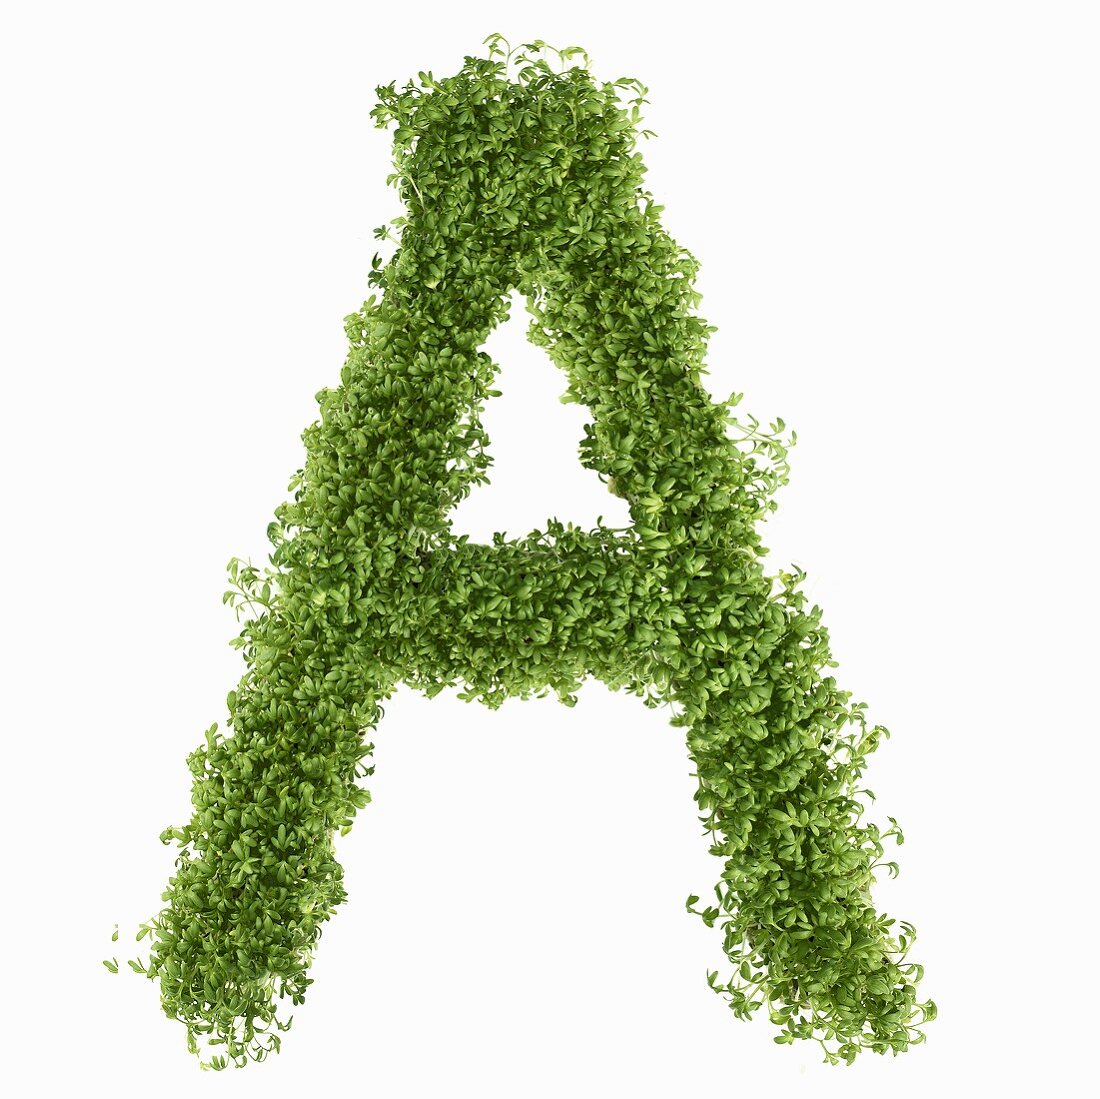 The letter A in cress